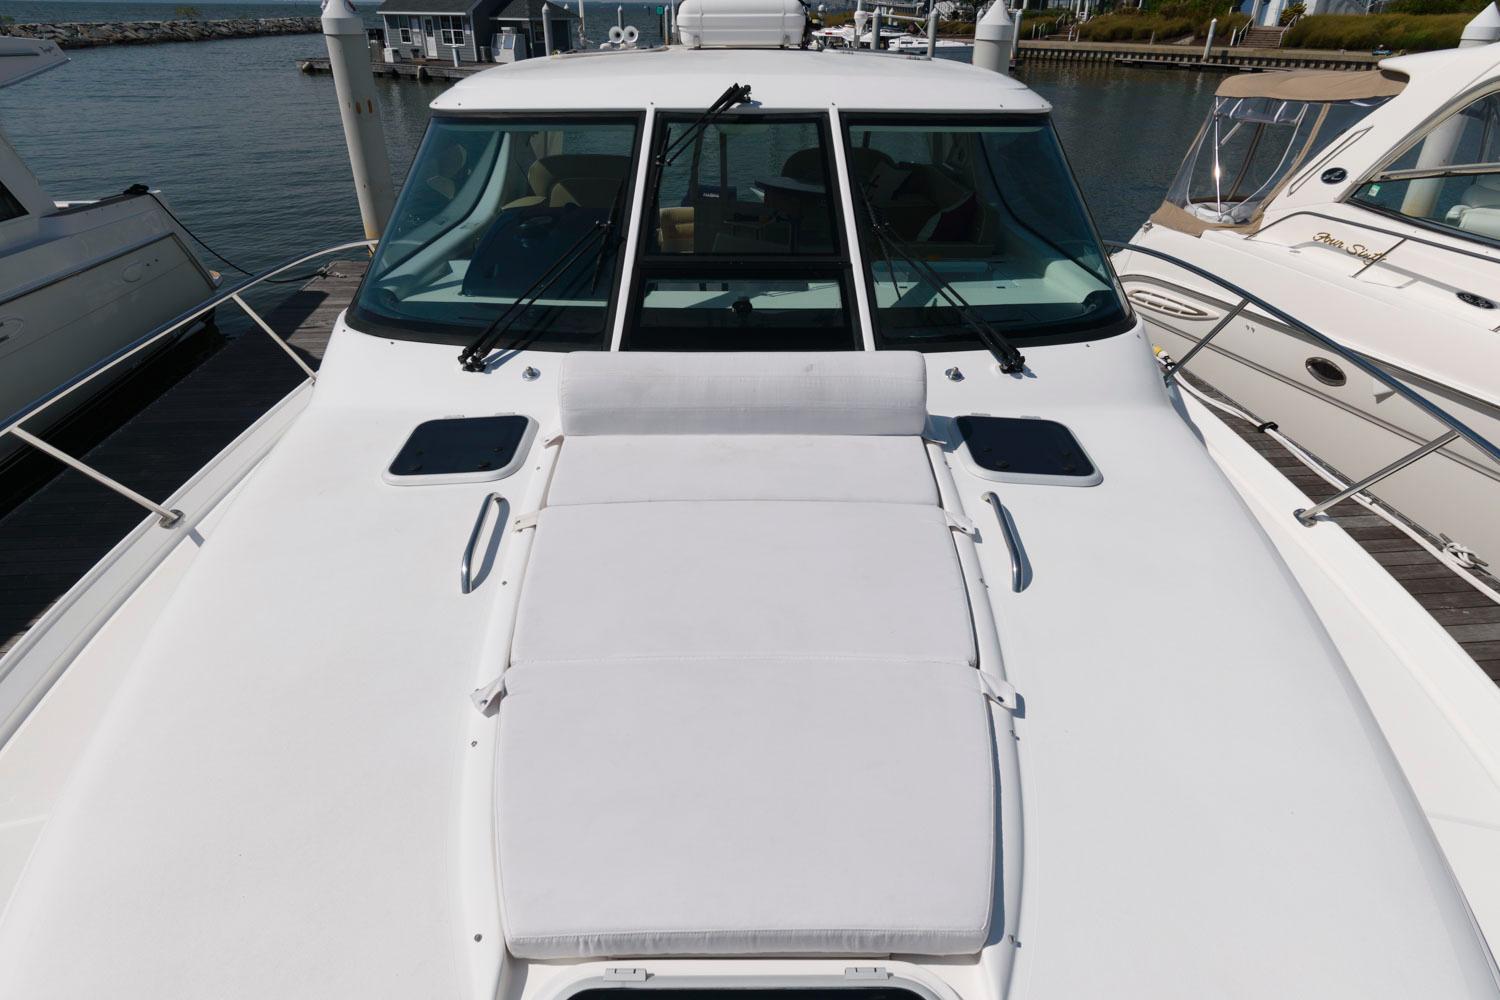 M 7247 RD Knot 10 Yacht Sales